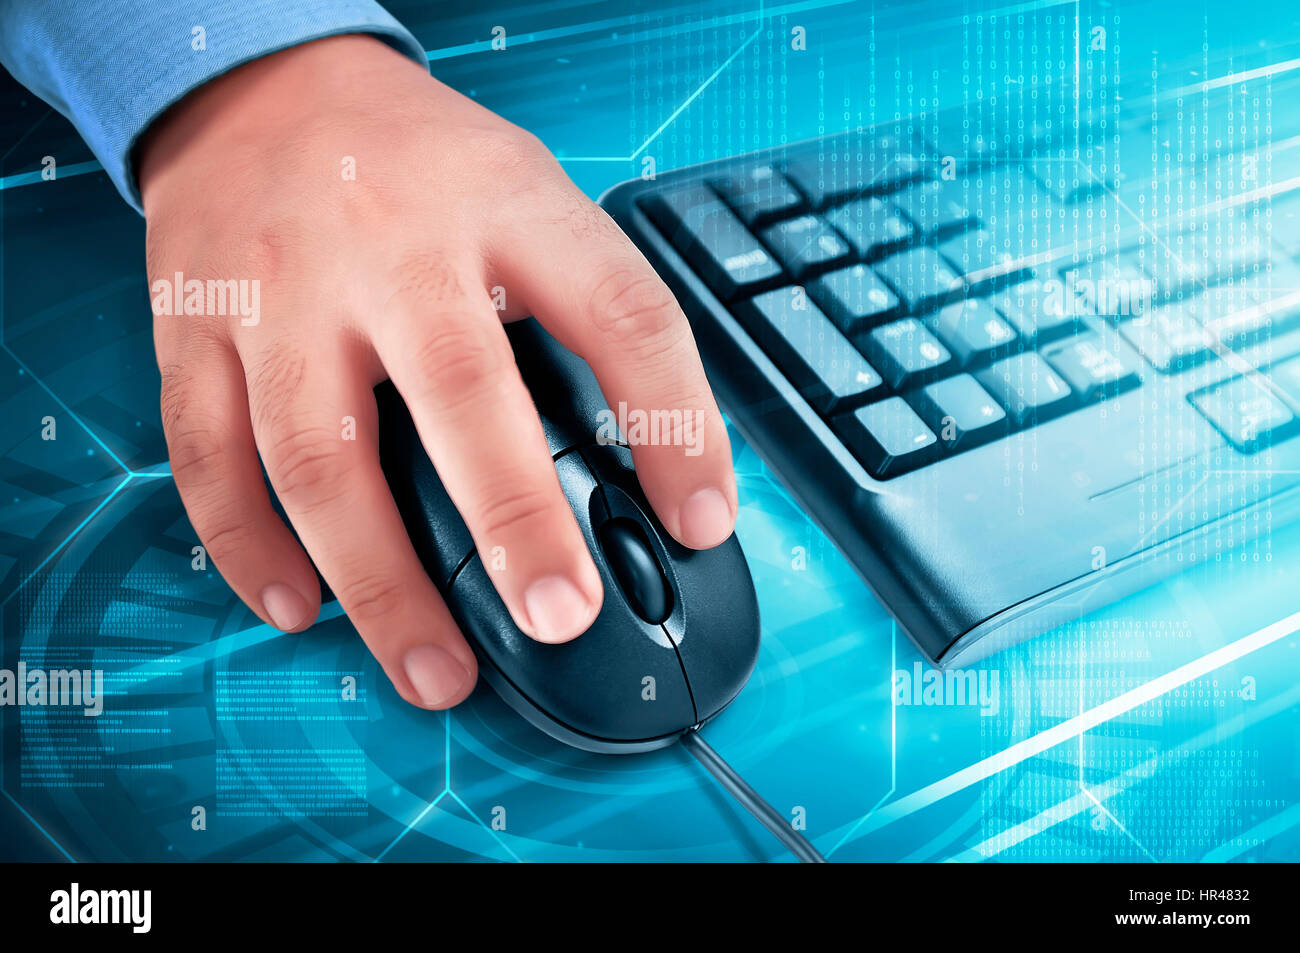 Male hand on computer mouse with keyboard beside him over blue digital  background Stock Photo - Alamy